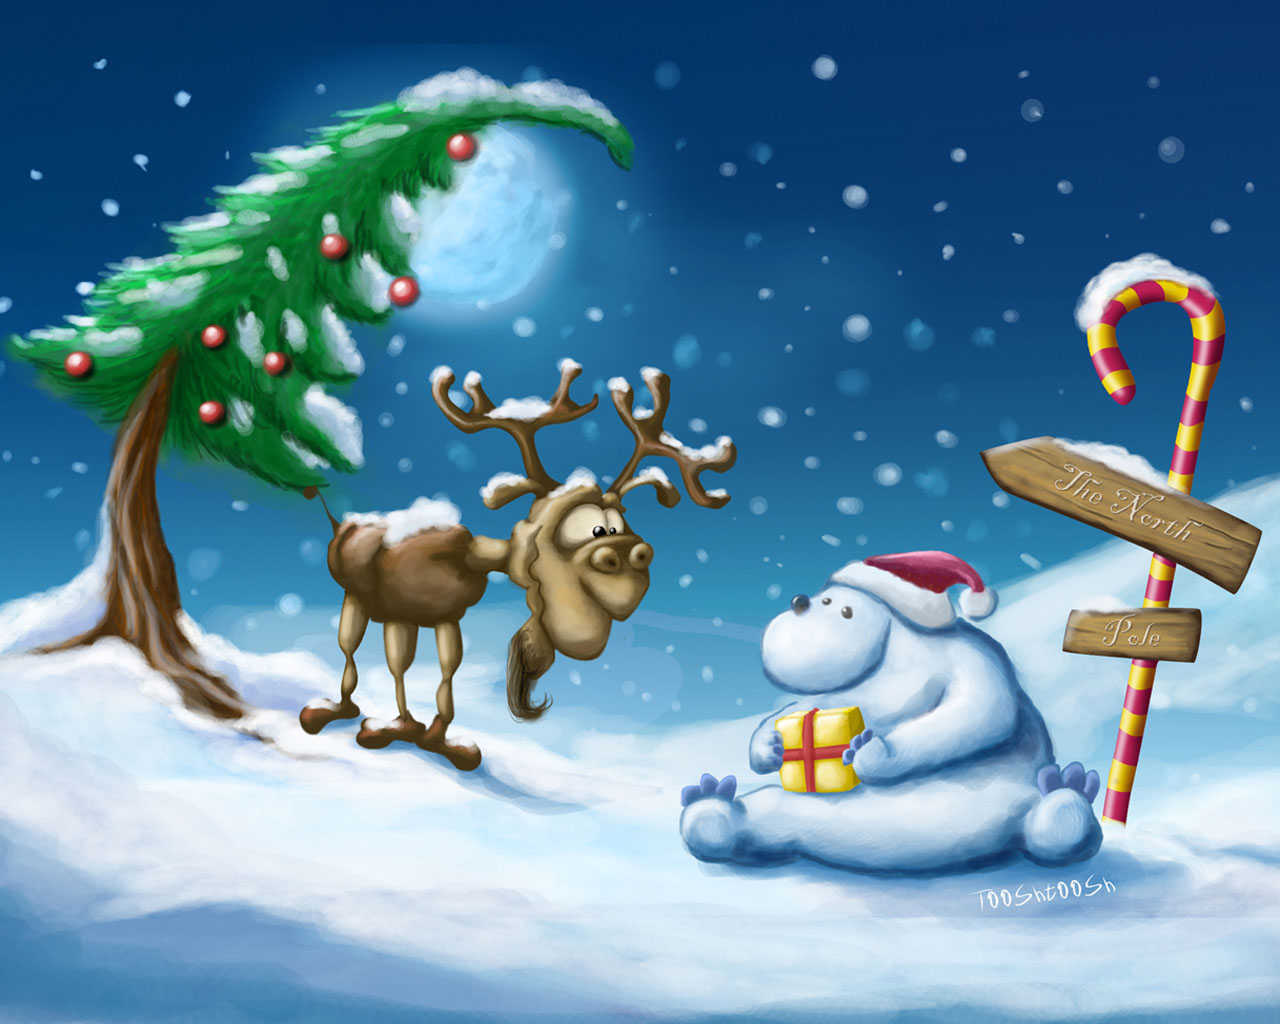 Free Cute Cartoon Bear in Christmas wallpaper is a great wallpaper for